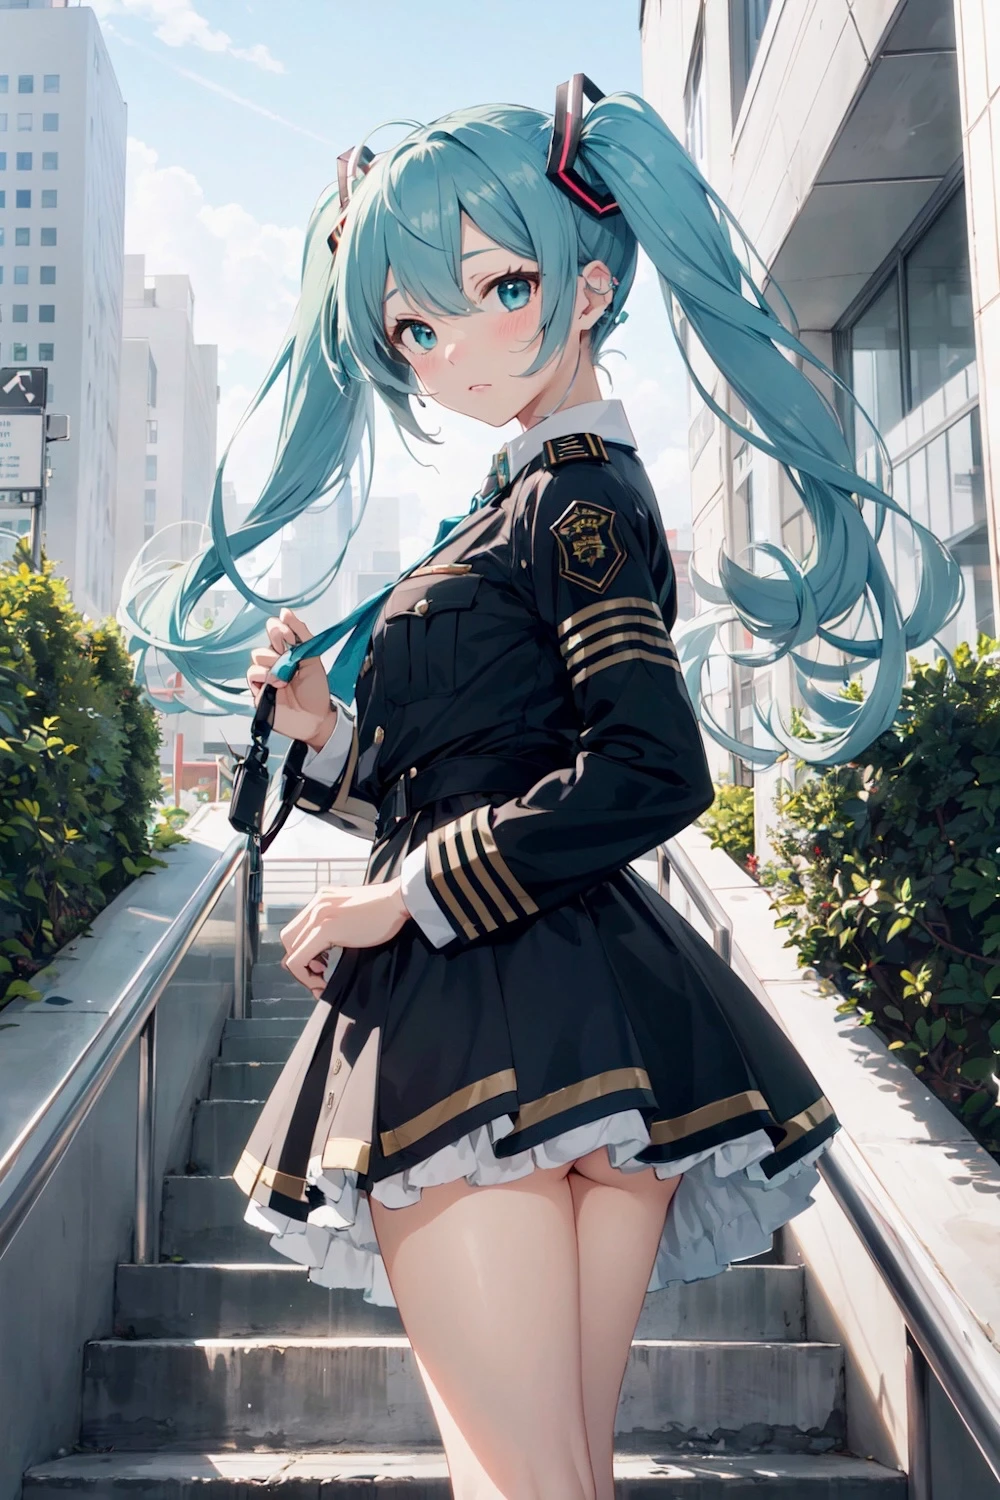 hatsune-miku-anime-style-all-ages-2-29